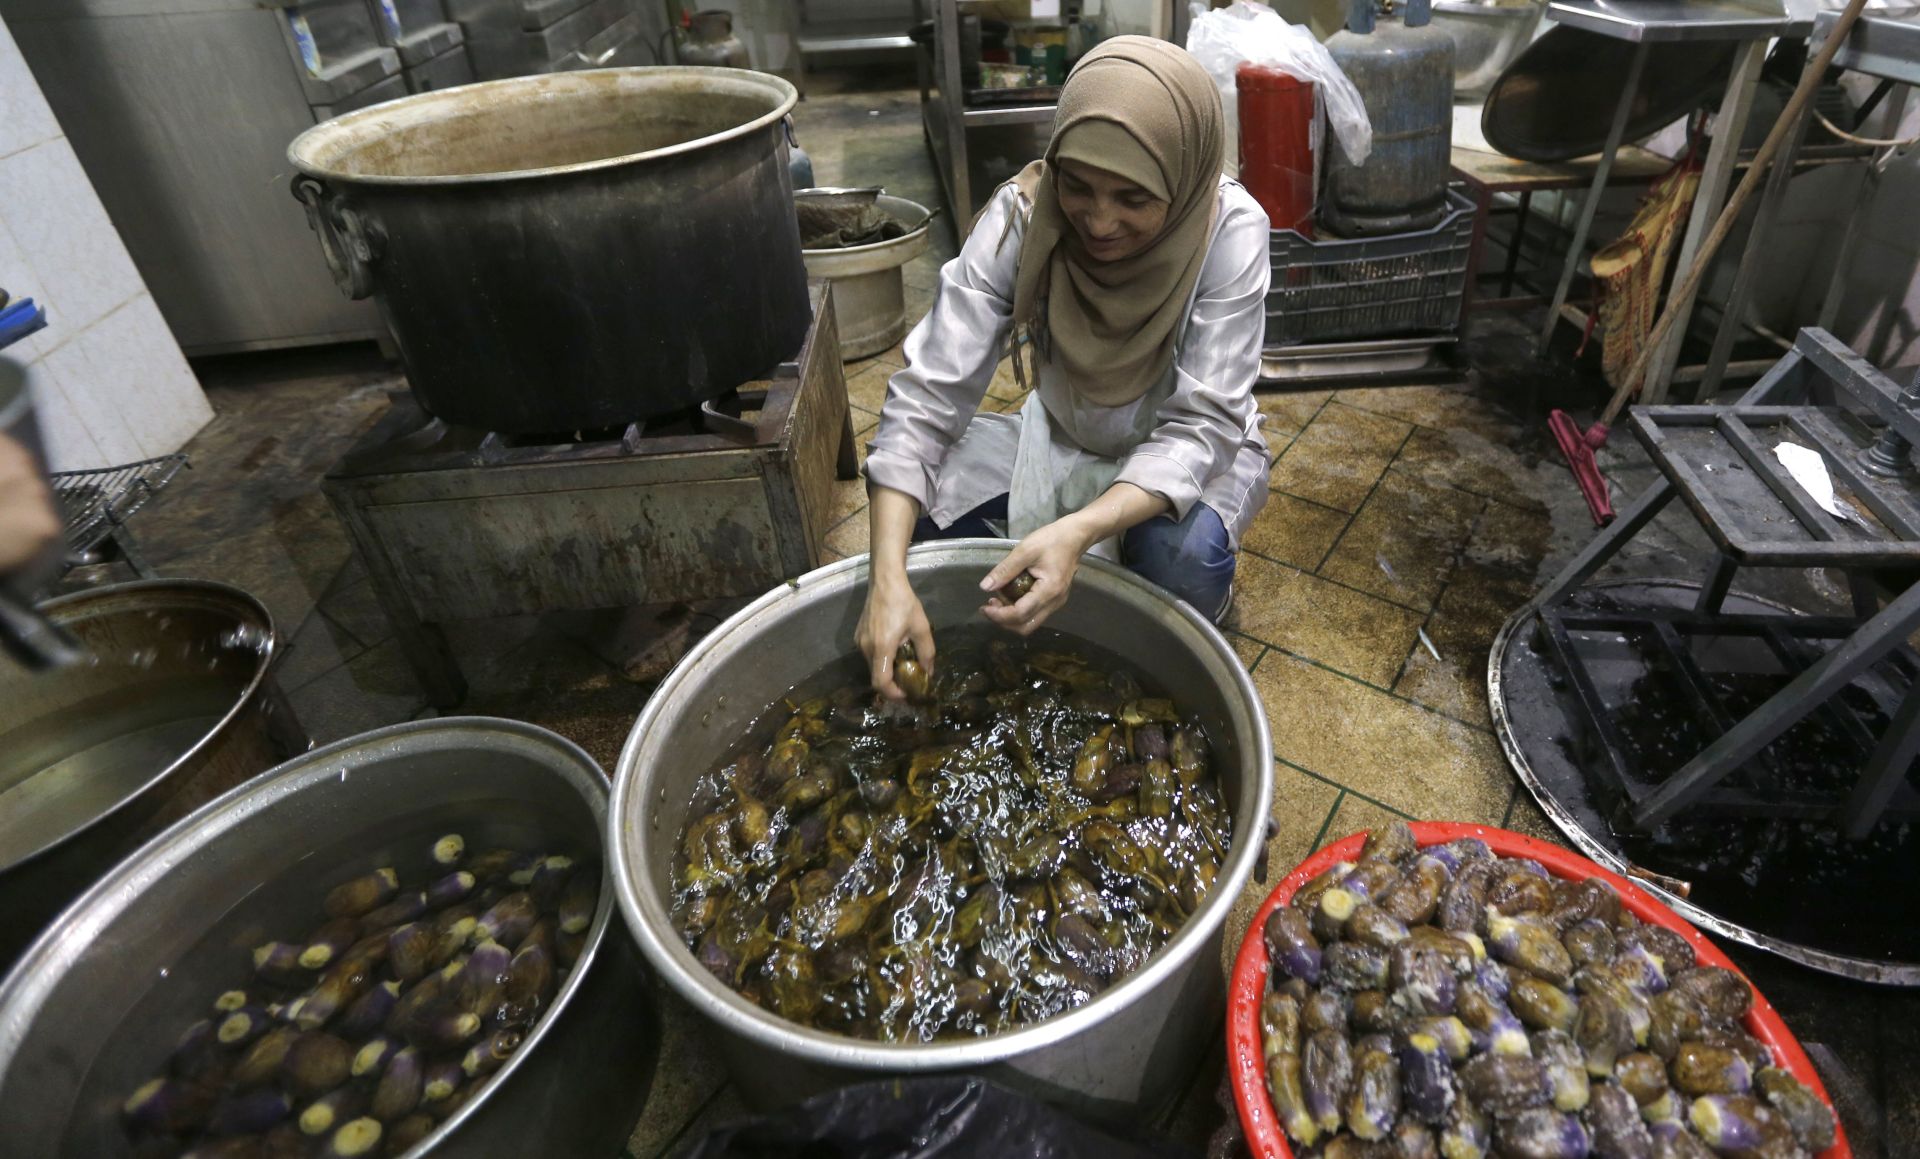 When a Little Syrian Eggplant Is More Than Just Food